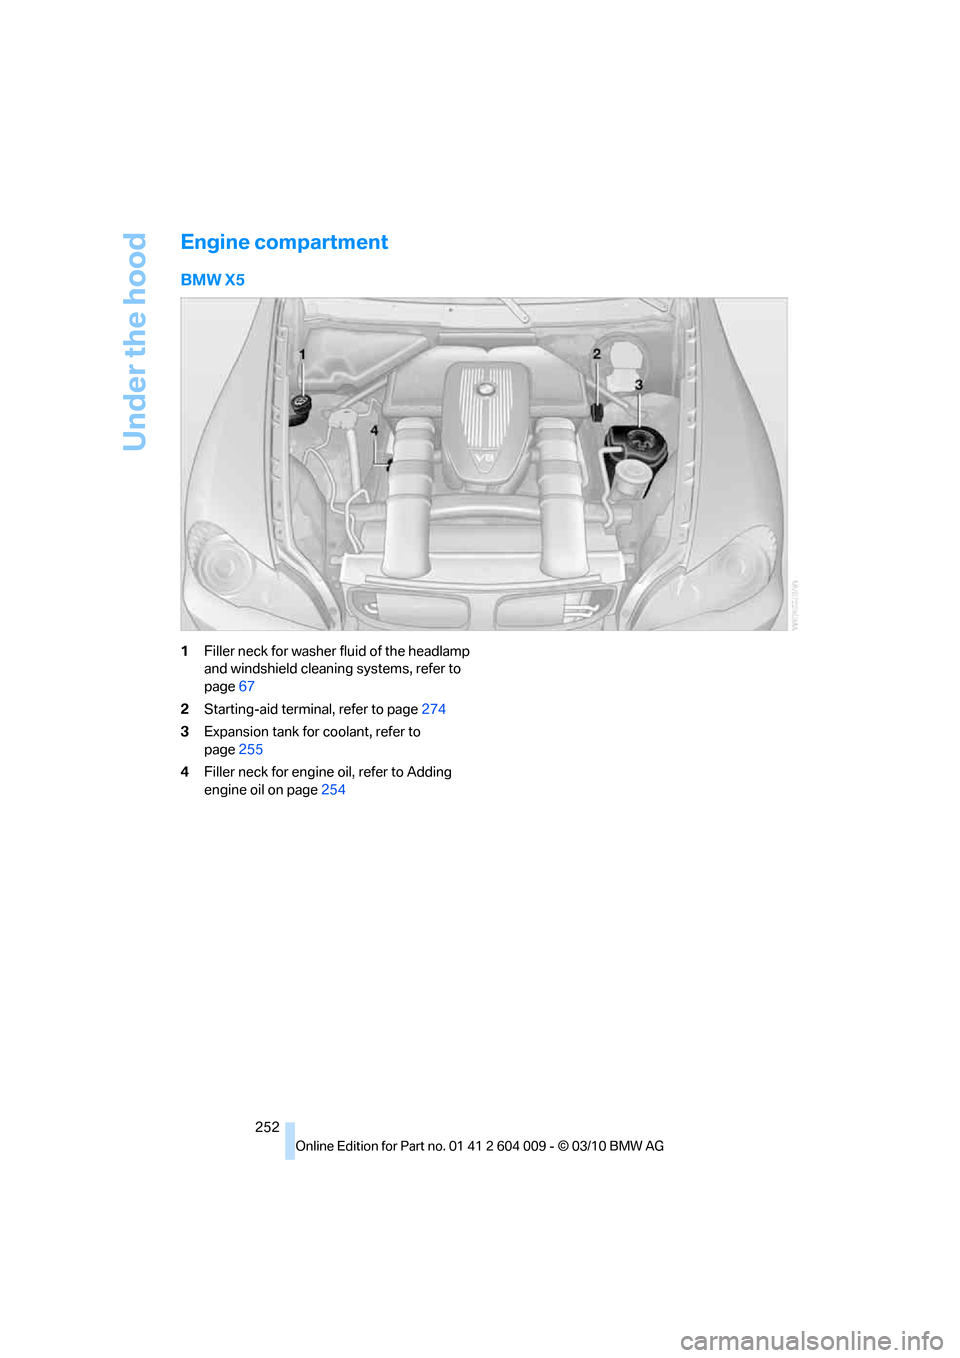 BMW X6 2012 E71 Owners Manual Under the hood
252
Engine compartment
BMW X5
1Filler neck for washer fluid of the headlamp 
and windshield cleaning systems, refer to 
page67
2Starting-aid terminal, refer to page274
3Expansion tank f